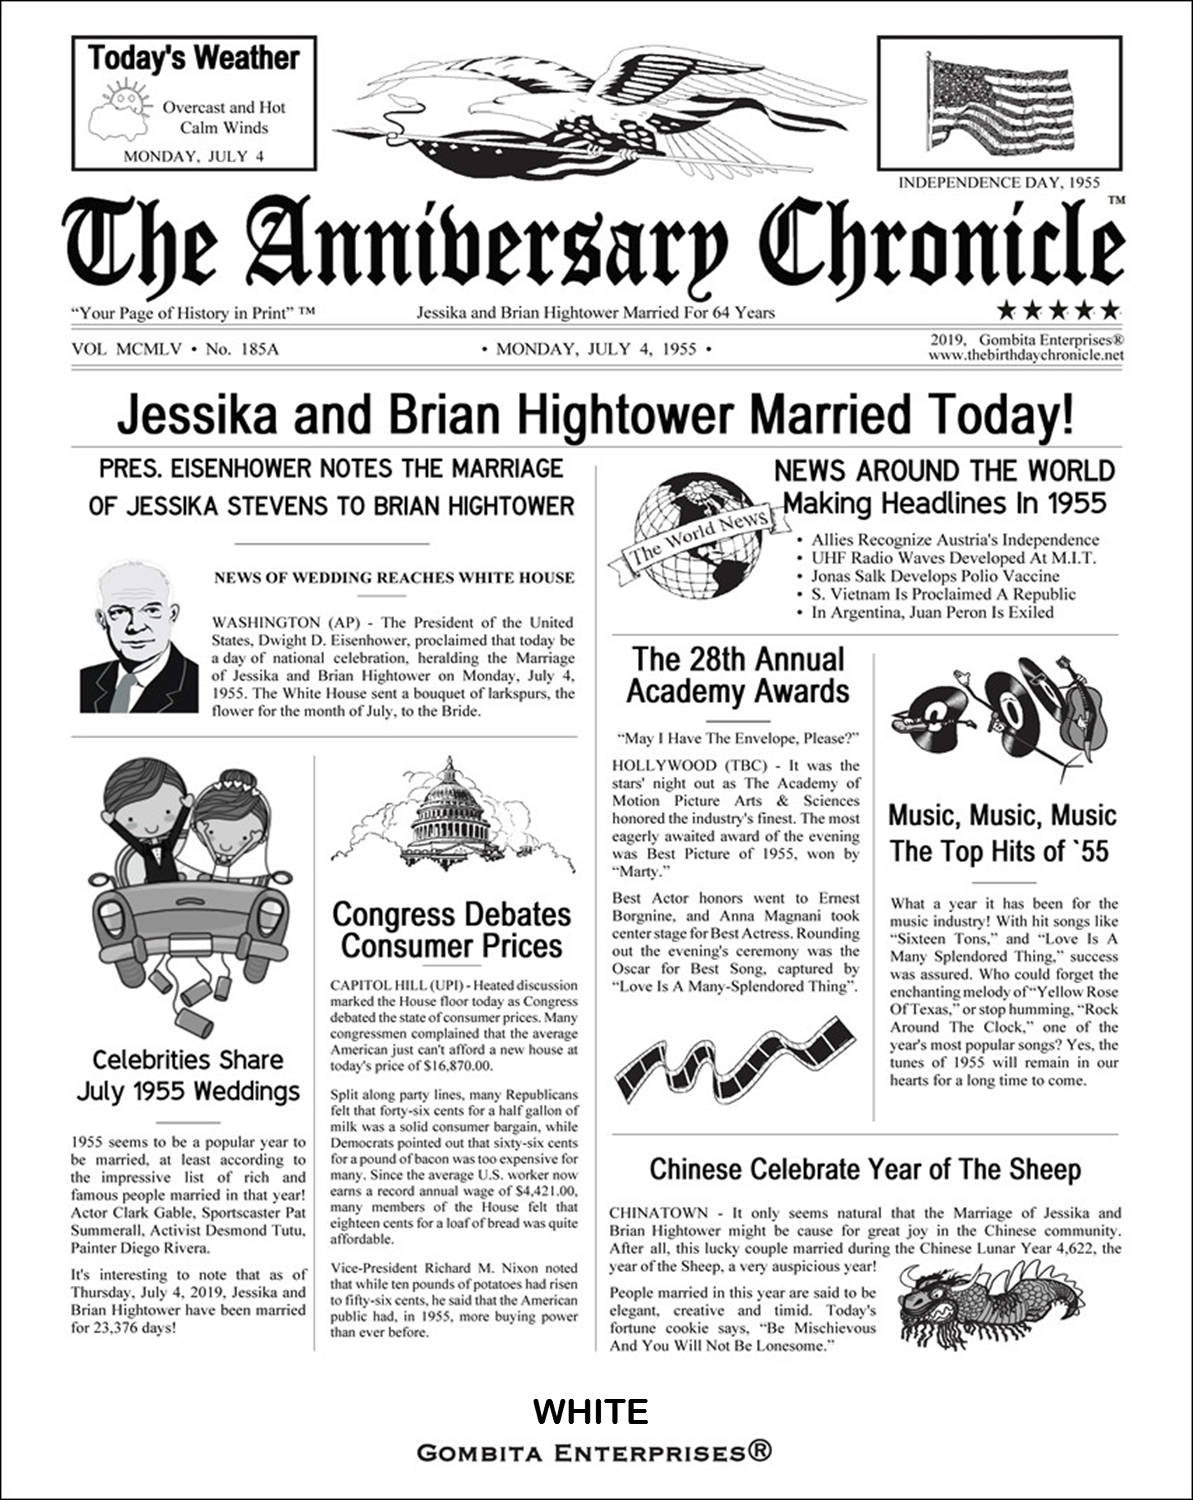 8.5 x 11 Inch By Mail - The Anniversary Chronicle